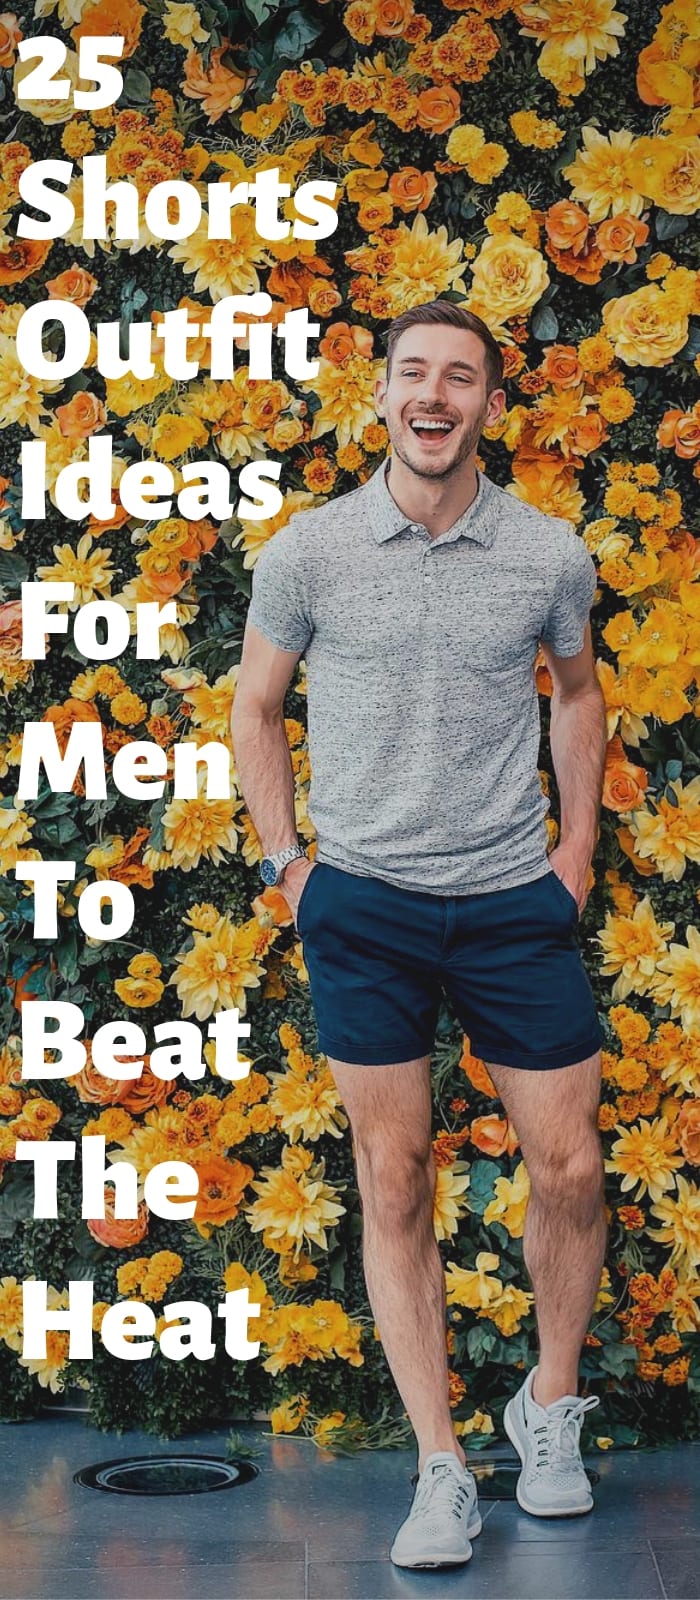 25 Shorts Outfit Ideas For Men To Beat The Heat (1)